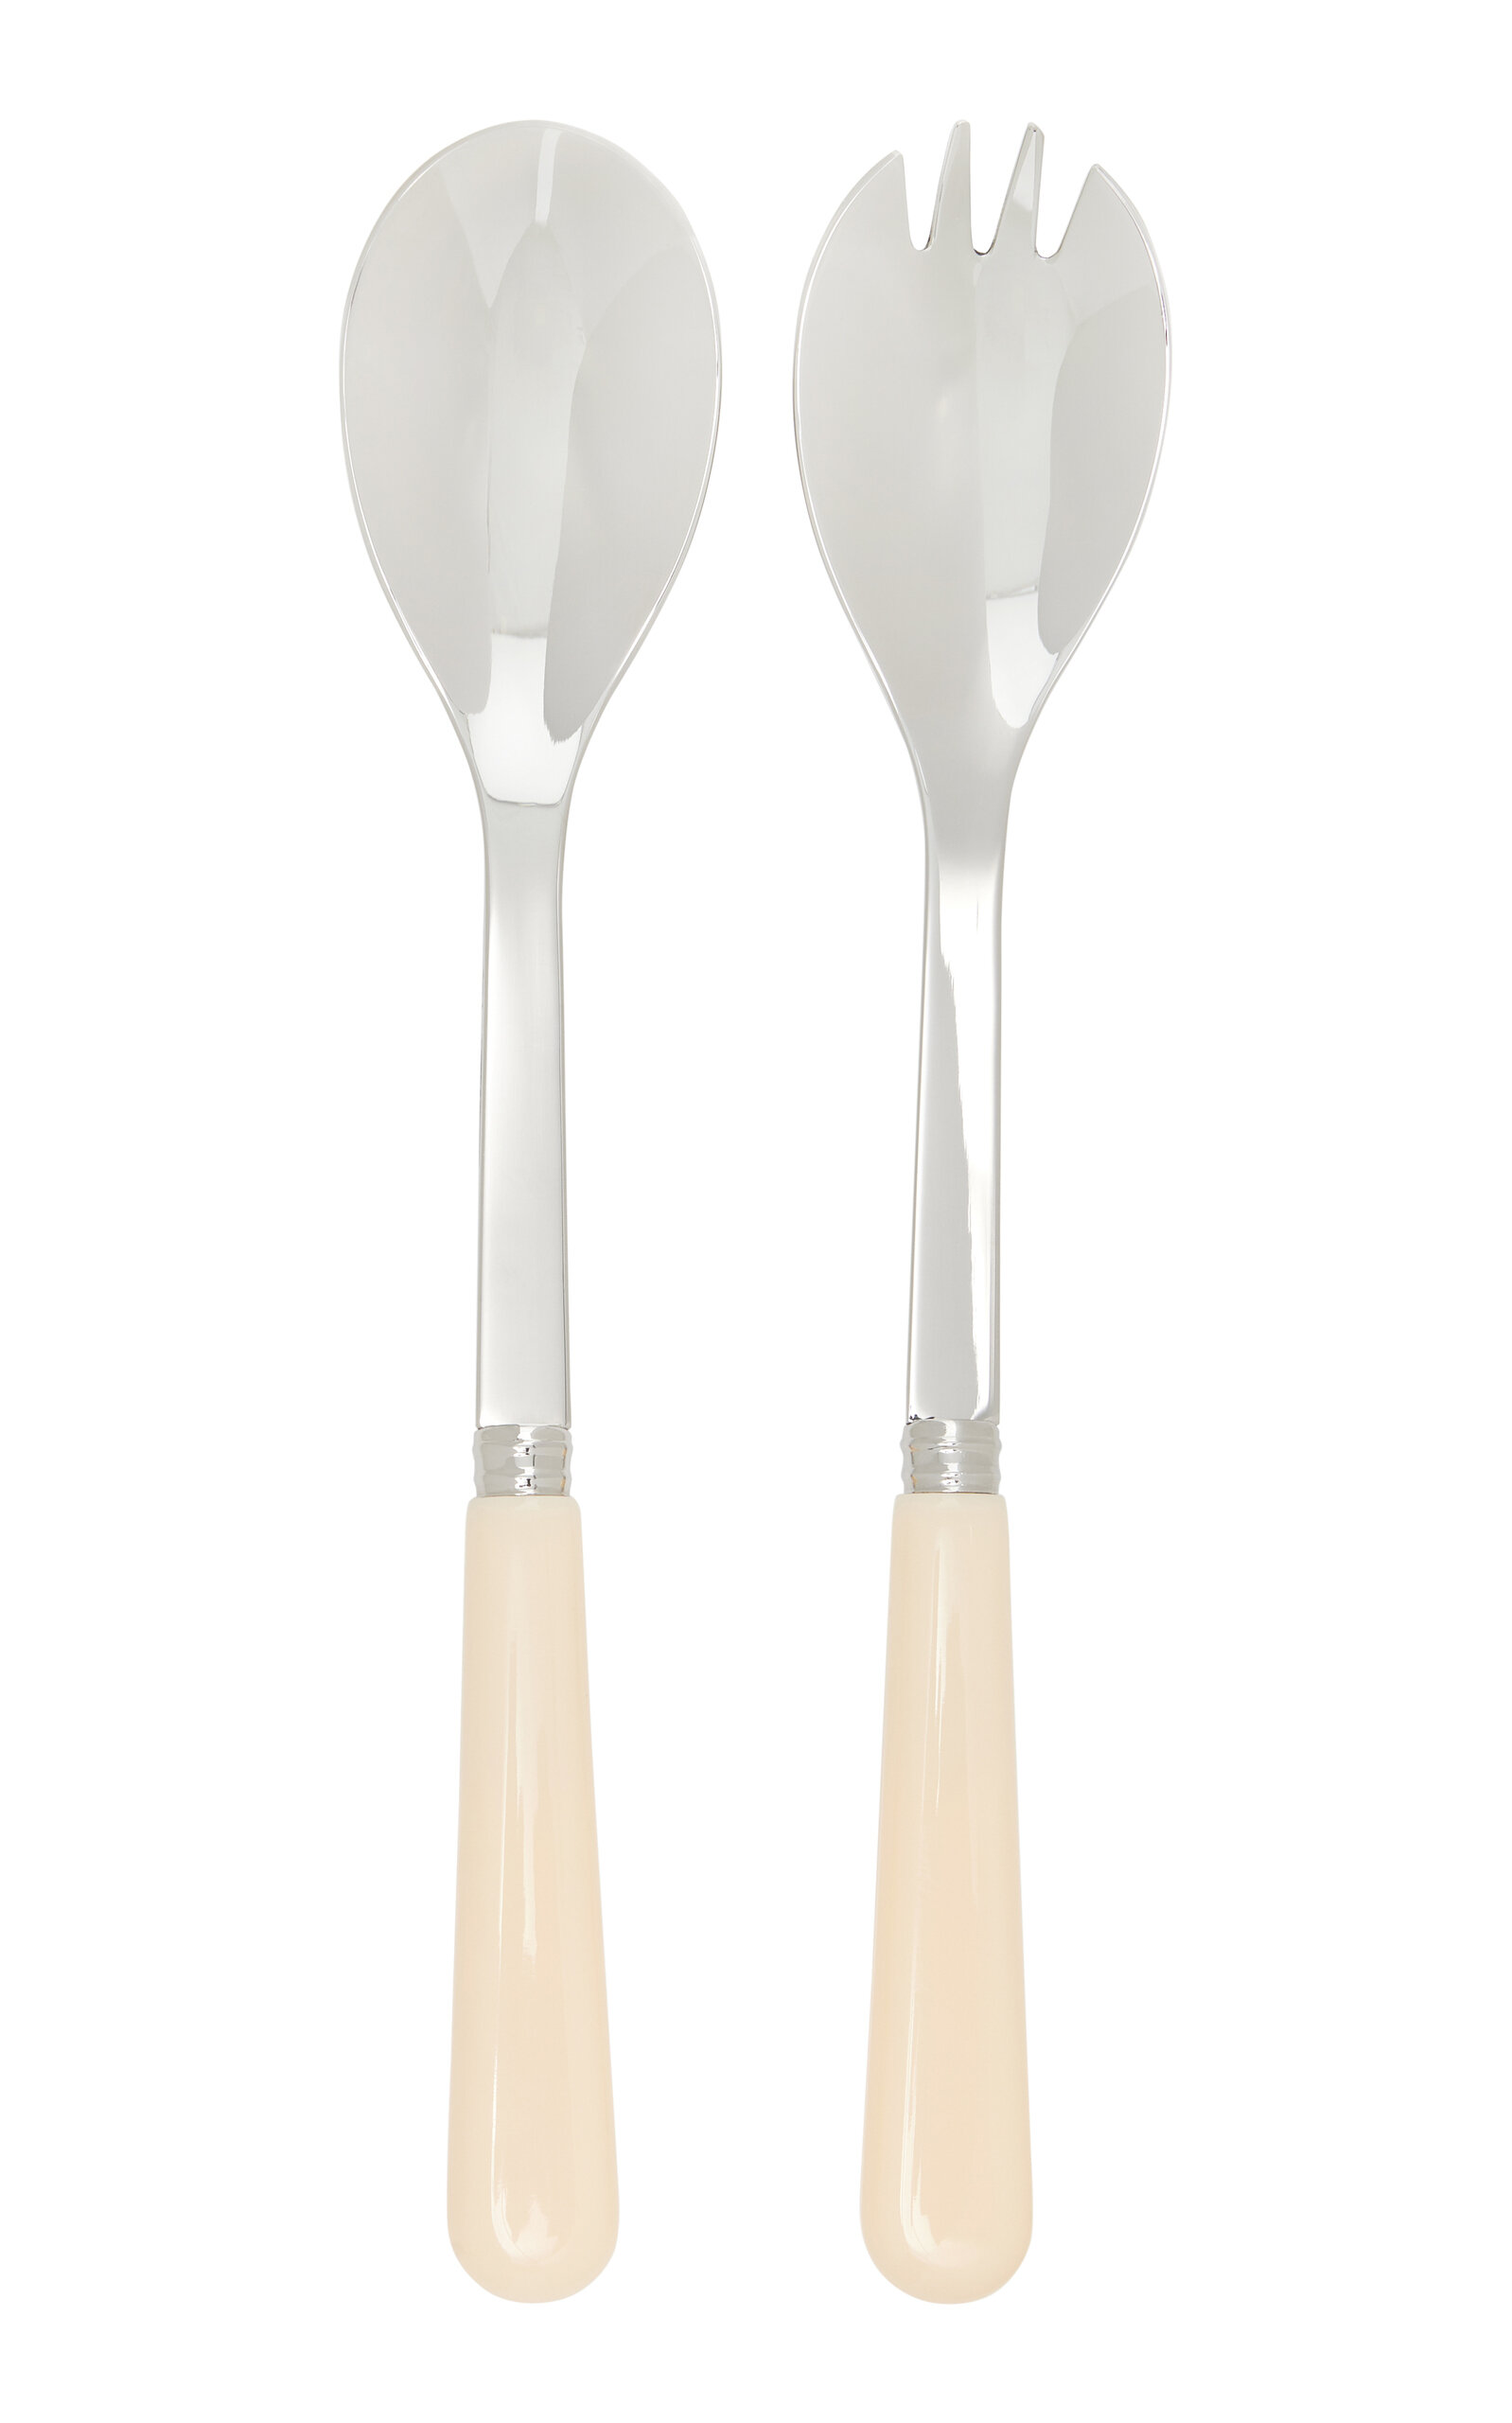 Sabre Two-piece Pop Stainless Steel Salad Set In White